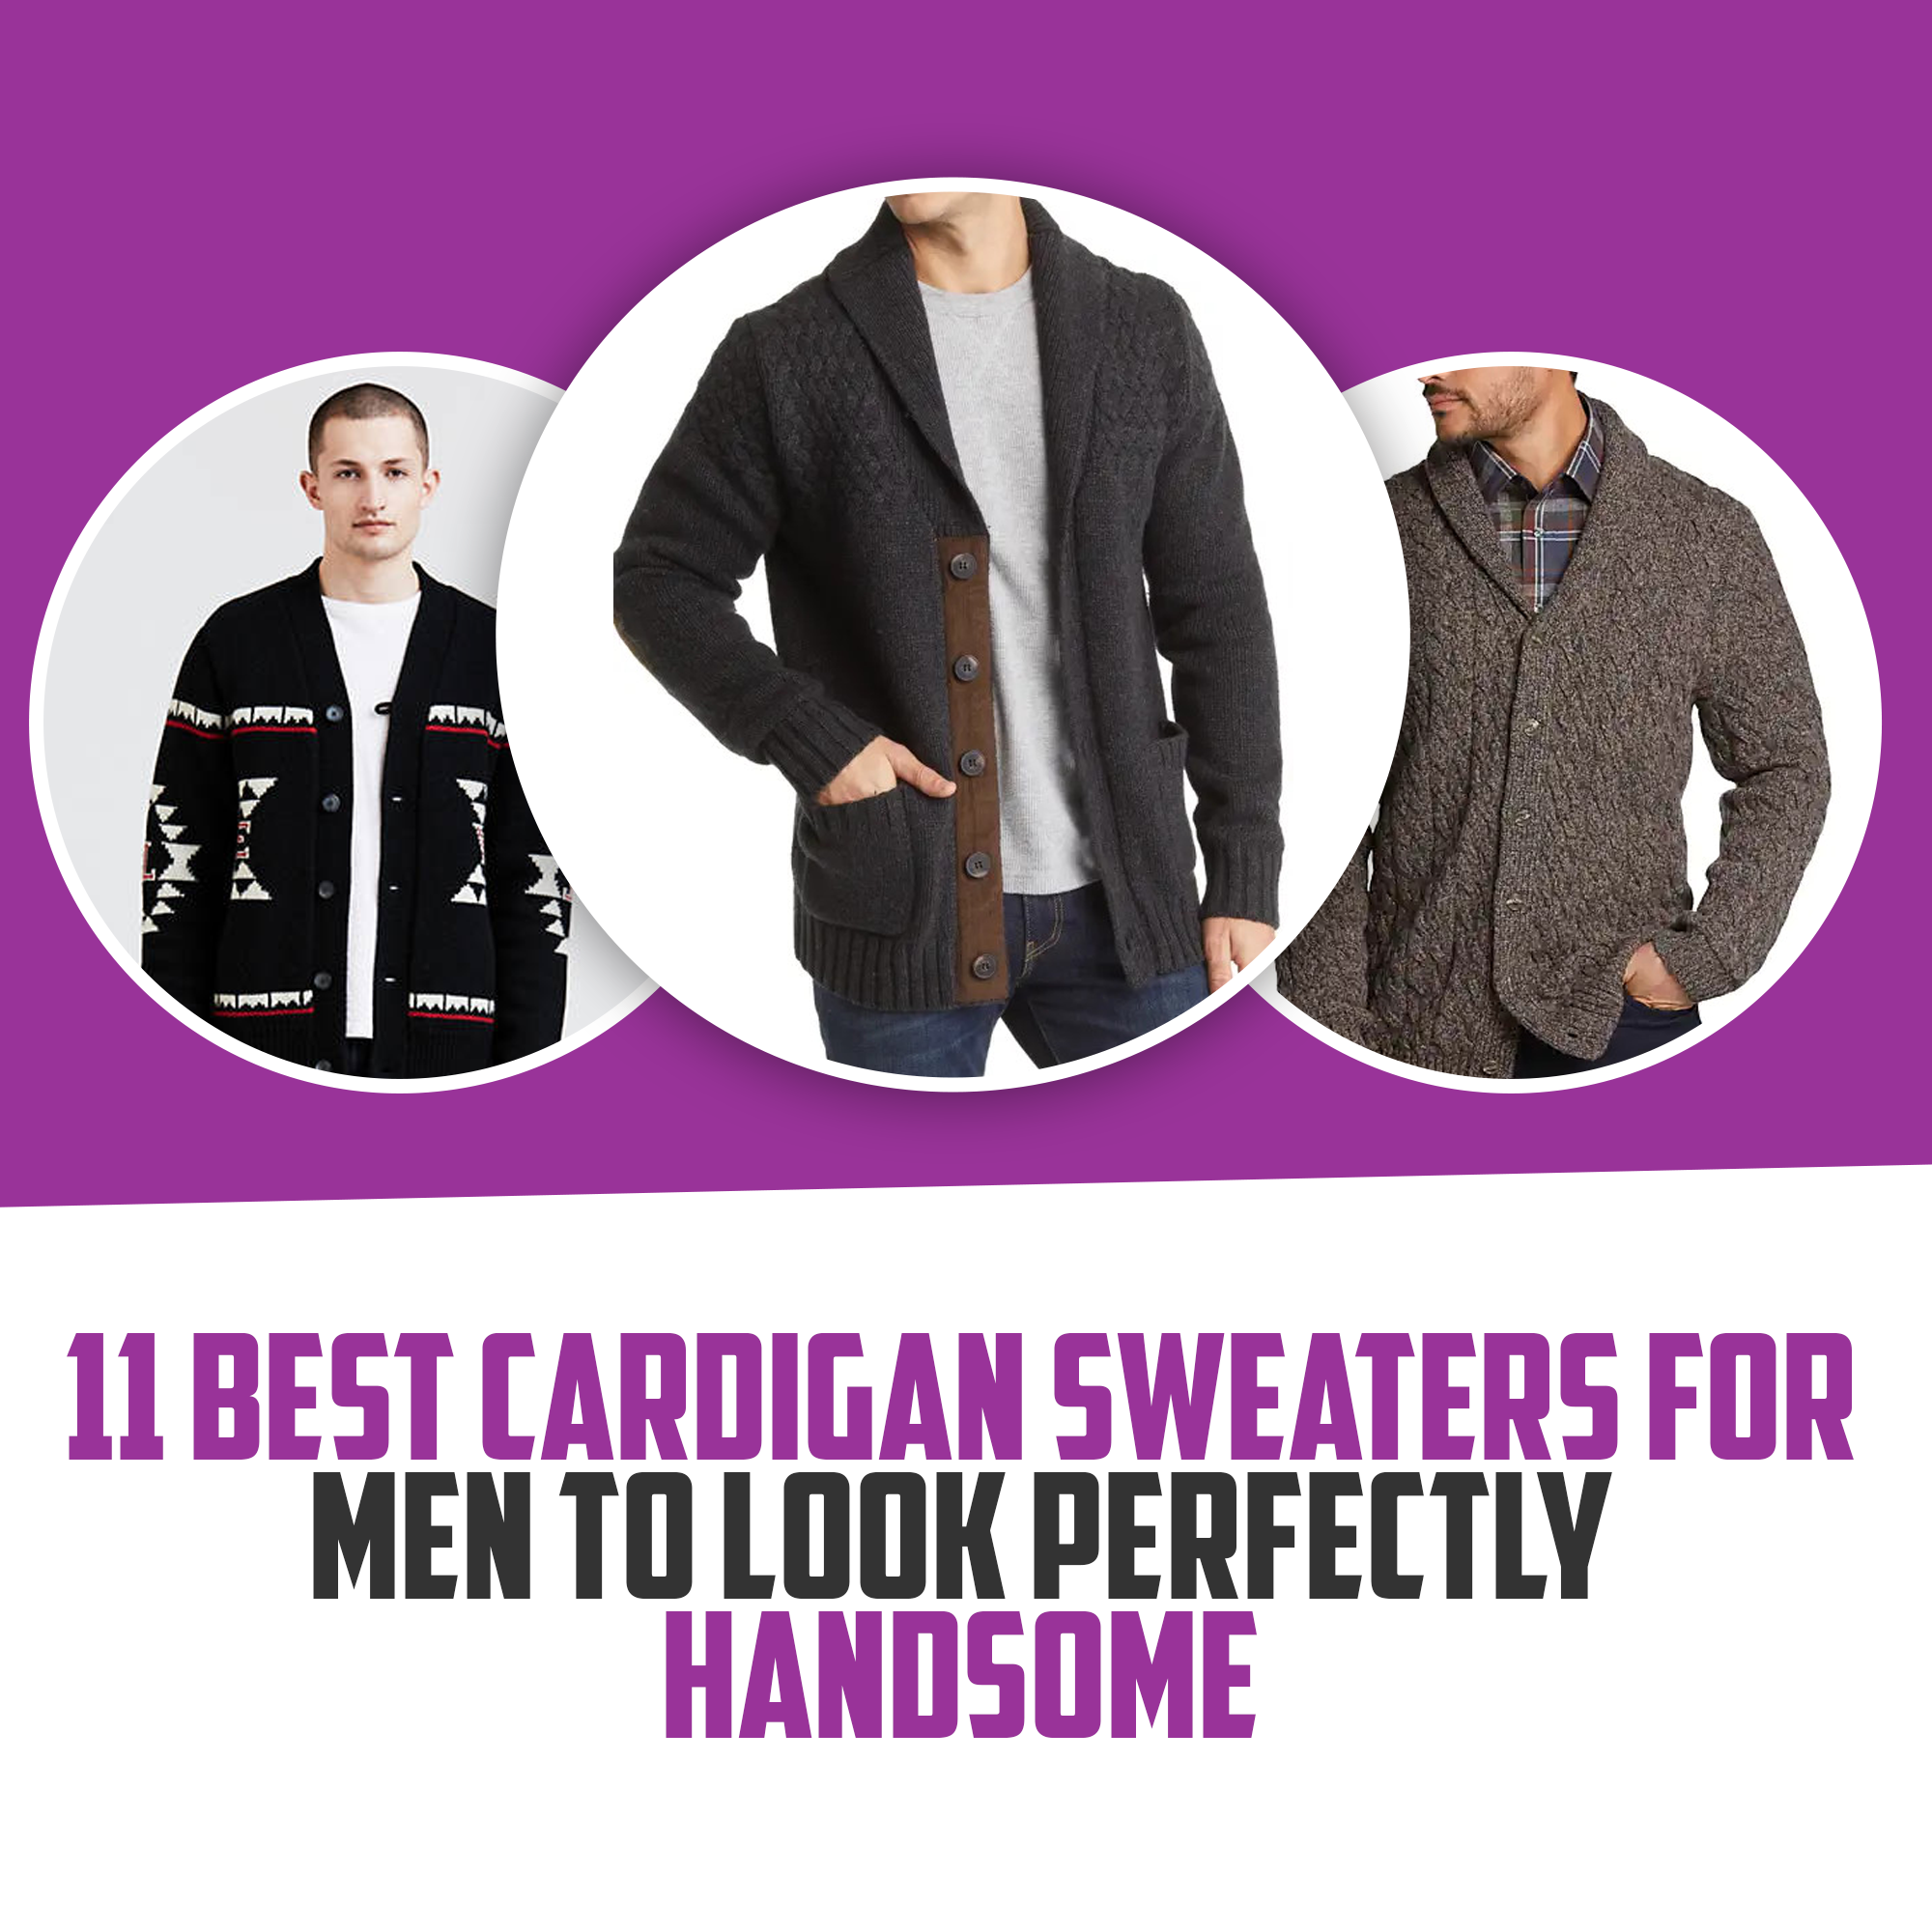 11 Best Cardigan Sweaters For Men To Look Perfectly Handsome